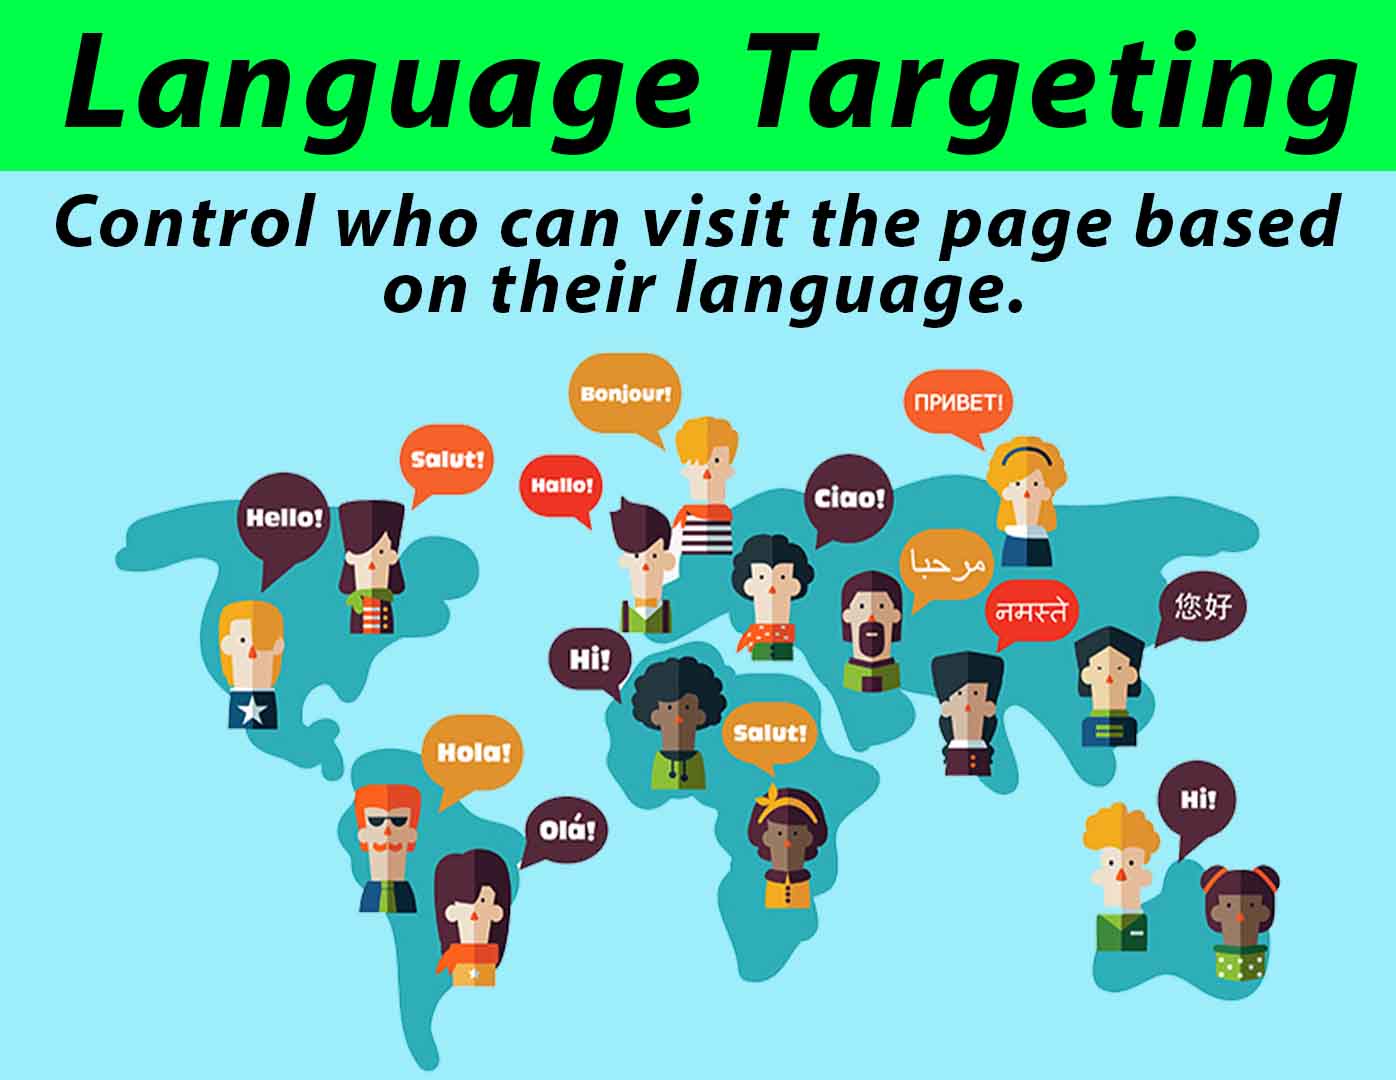 How to control who visits my page based on their language